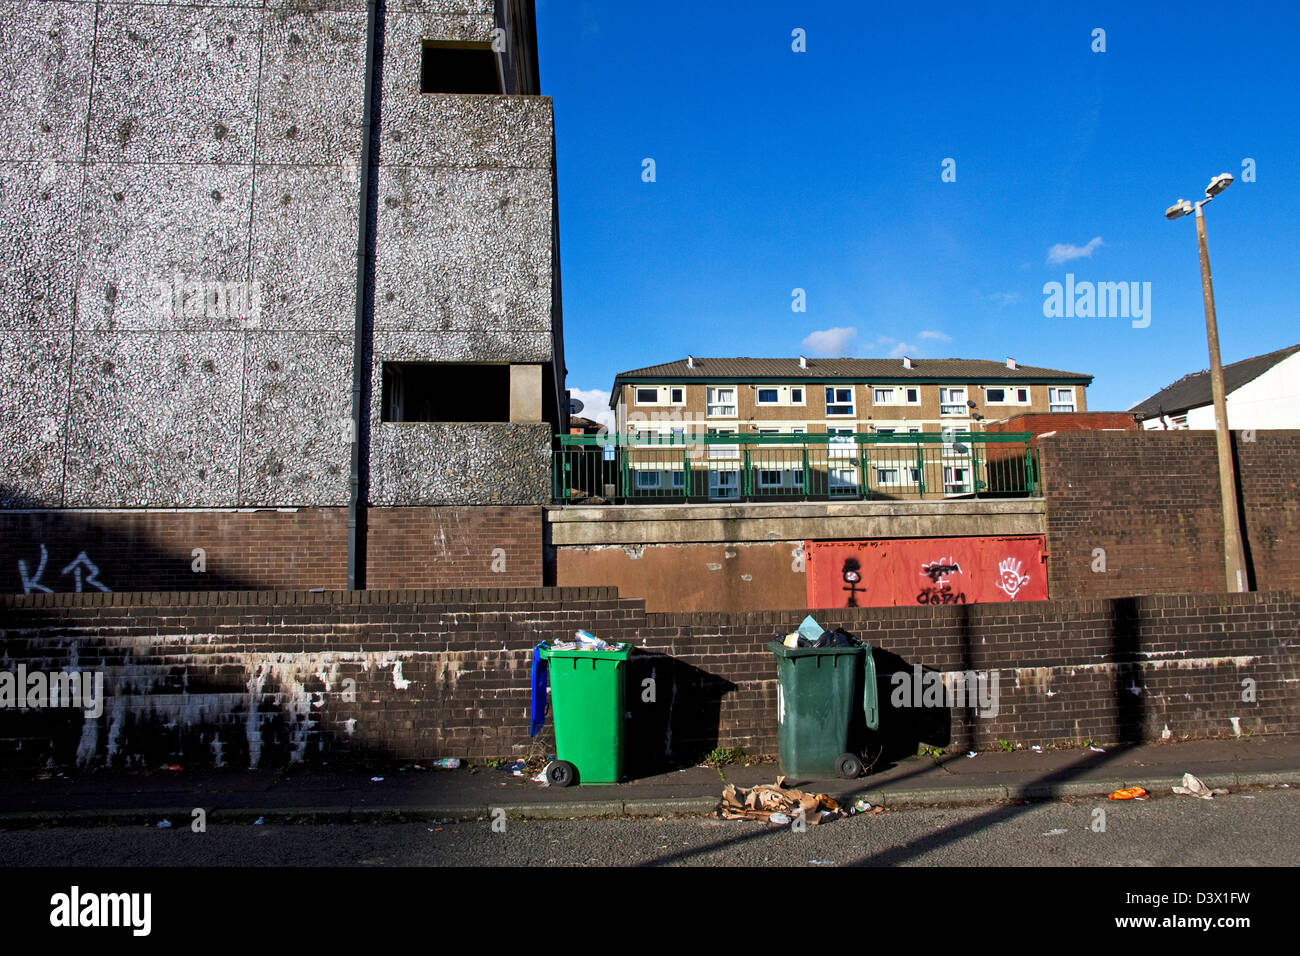 Housing on the Lower Falinge estate, named most deprived area in England, Rochdale, Greater Manchester, England, UK Stock Photo